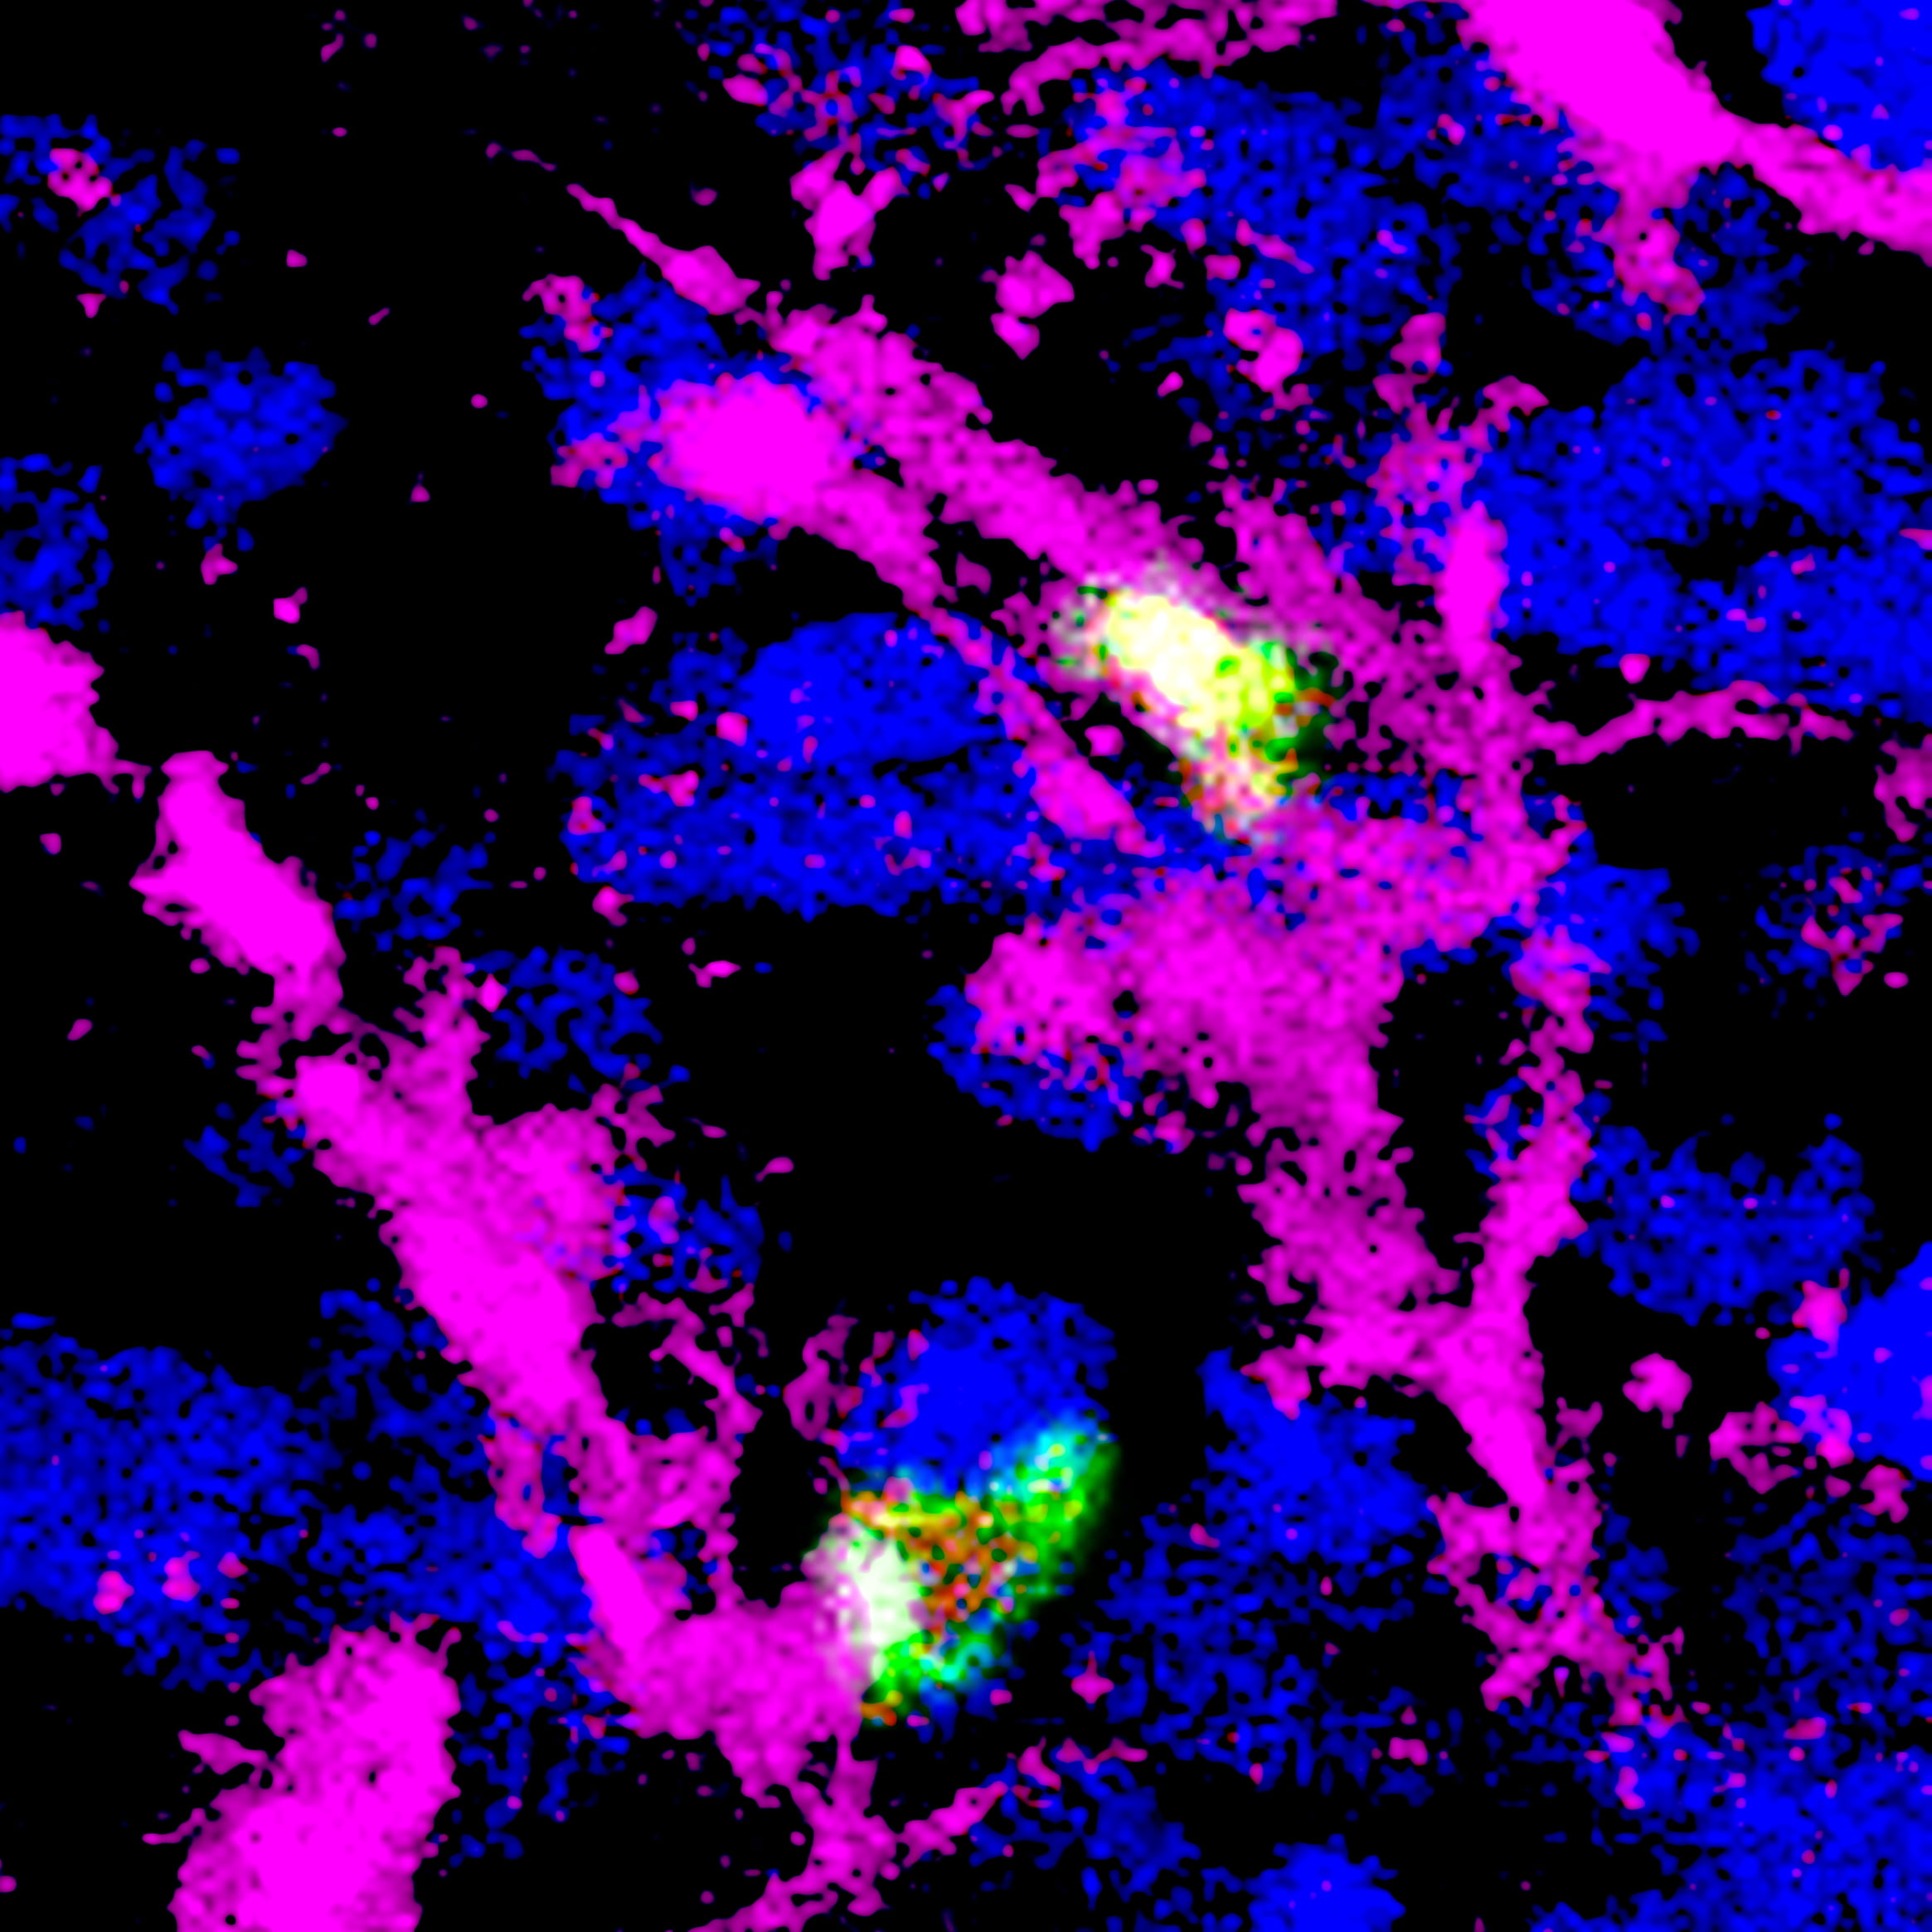 T regulatory cells (green with red nuclei) interact with antigen-presenting cells (magenta) in a tumor (blue). The Treg cell on top is activated (green fluorescence in the nucleus), while the one at the bottom is not (green fluorescence outside the nucleus). Activation of Treg cells promotes tumor growth.